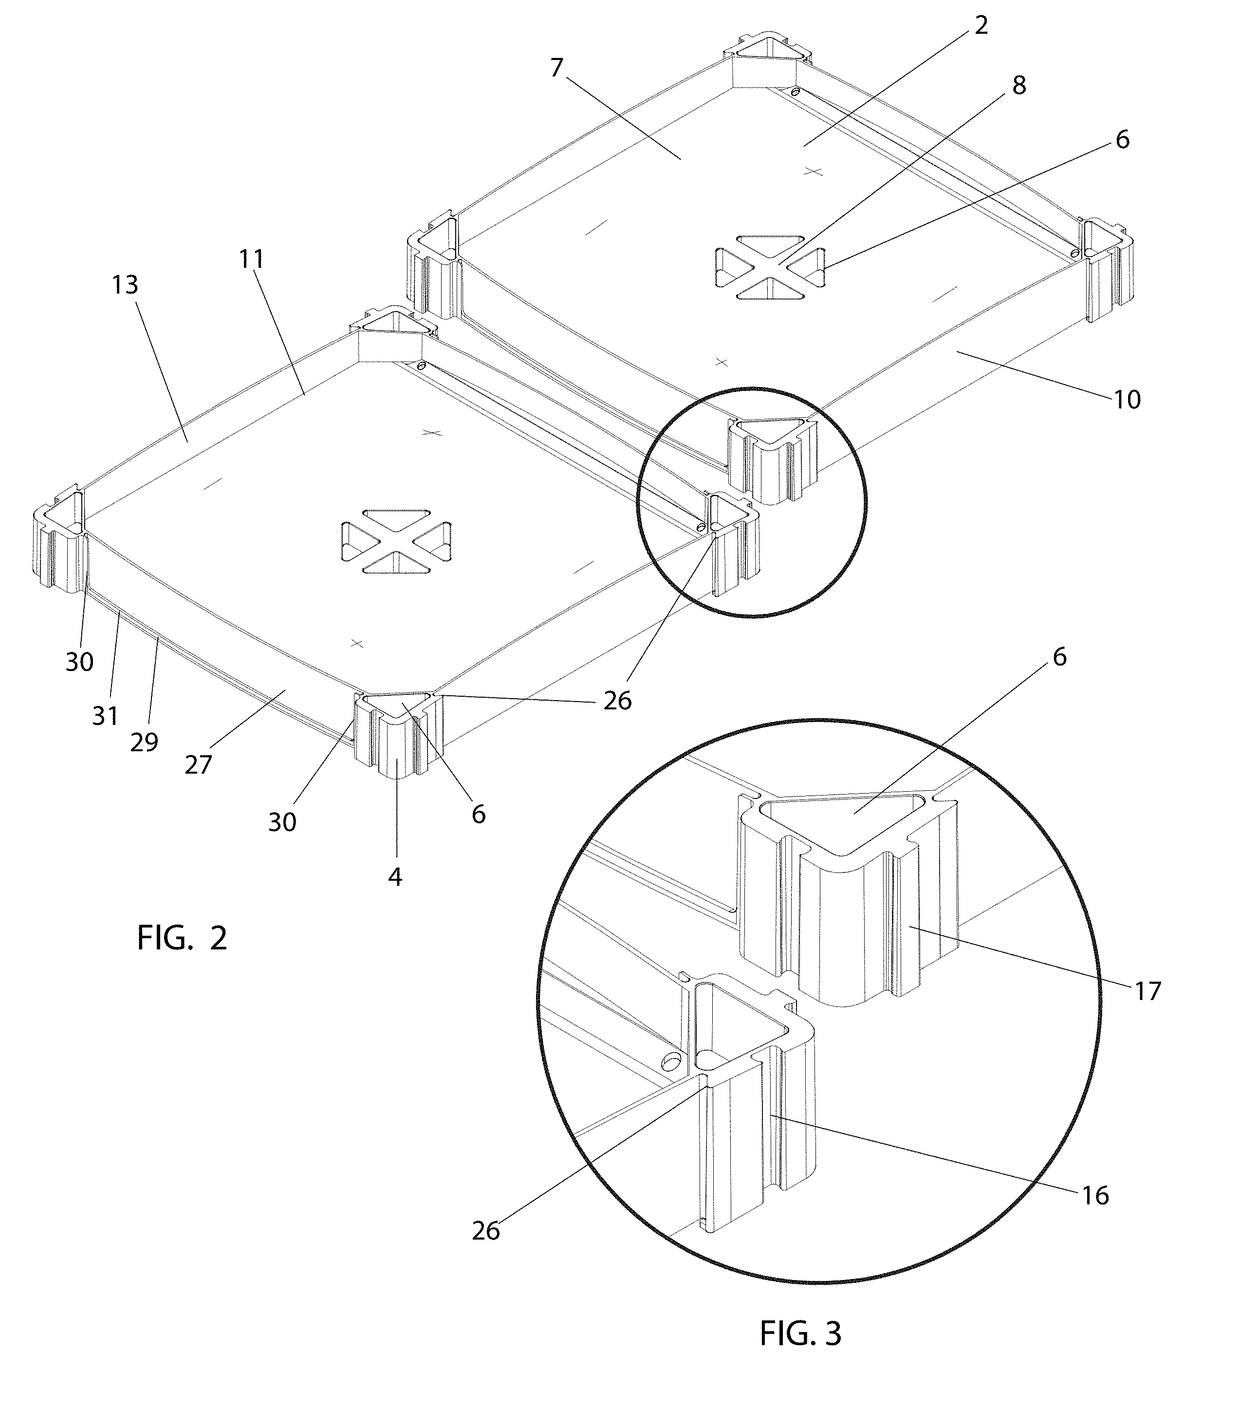 Configurable and dismantlable display case system comprising a plastic shelving unit with trays at different levels, and method of assembly